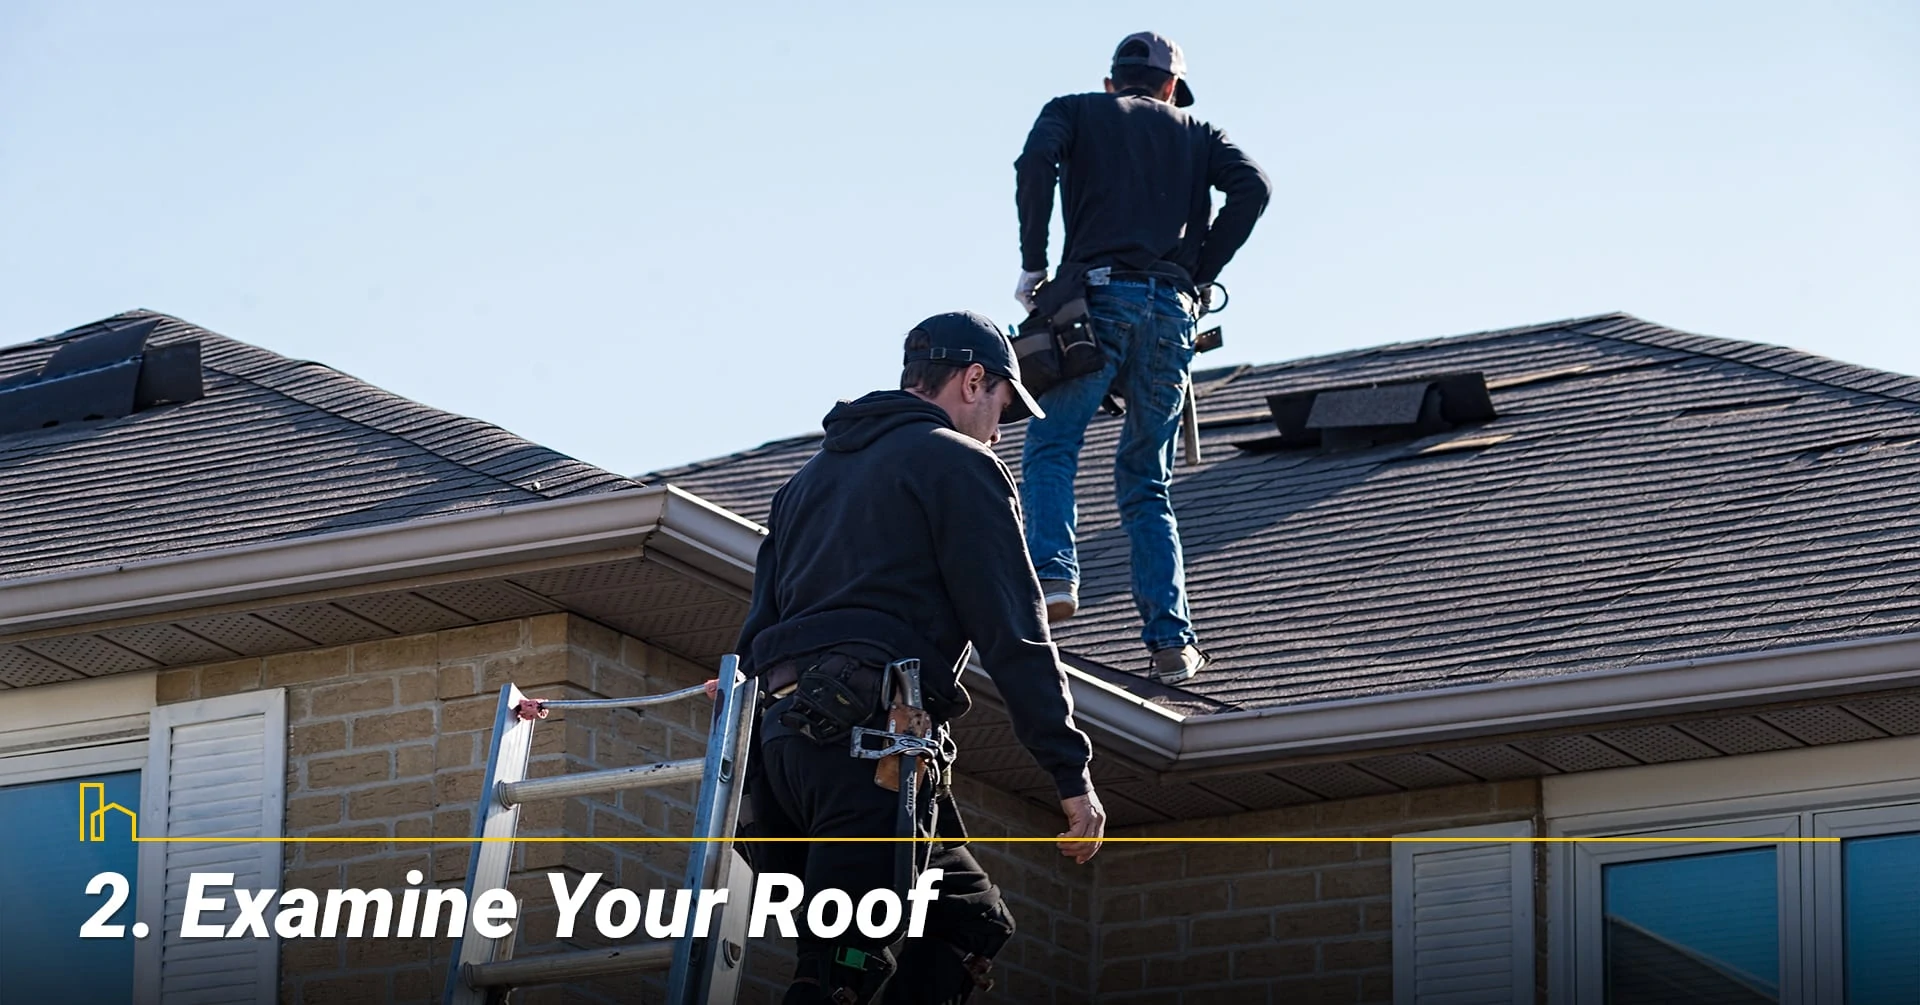 Examine Your Roof, review condition of the roof